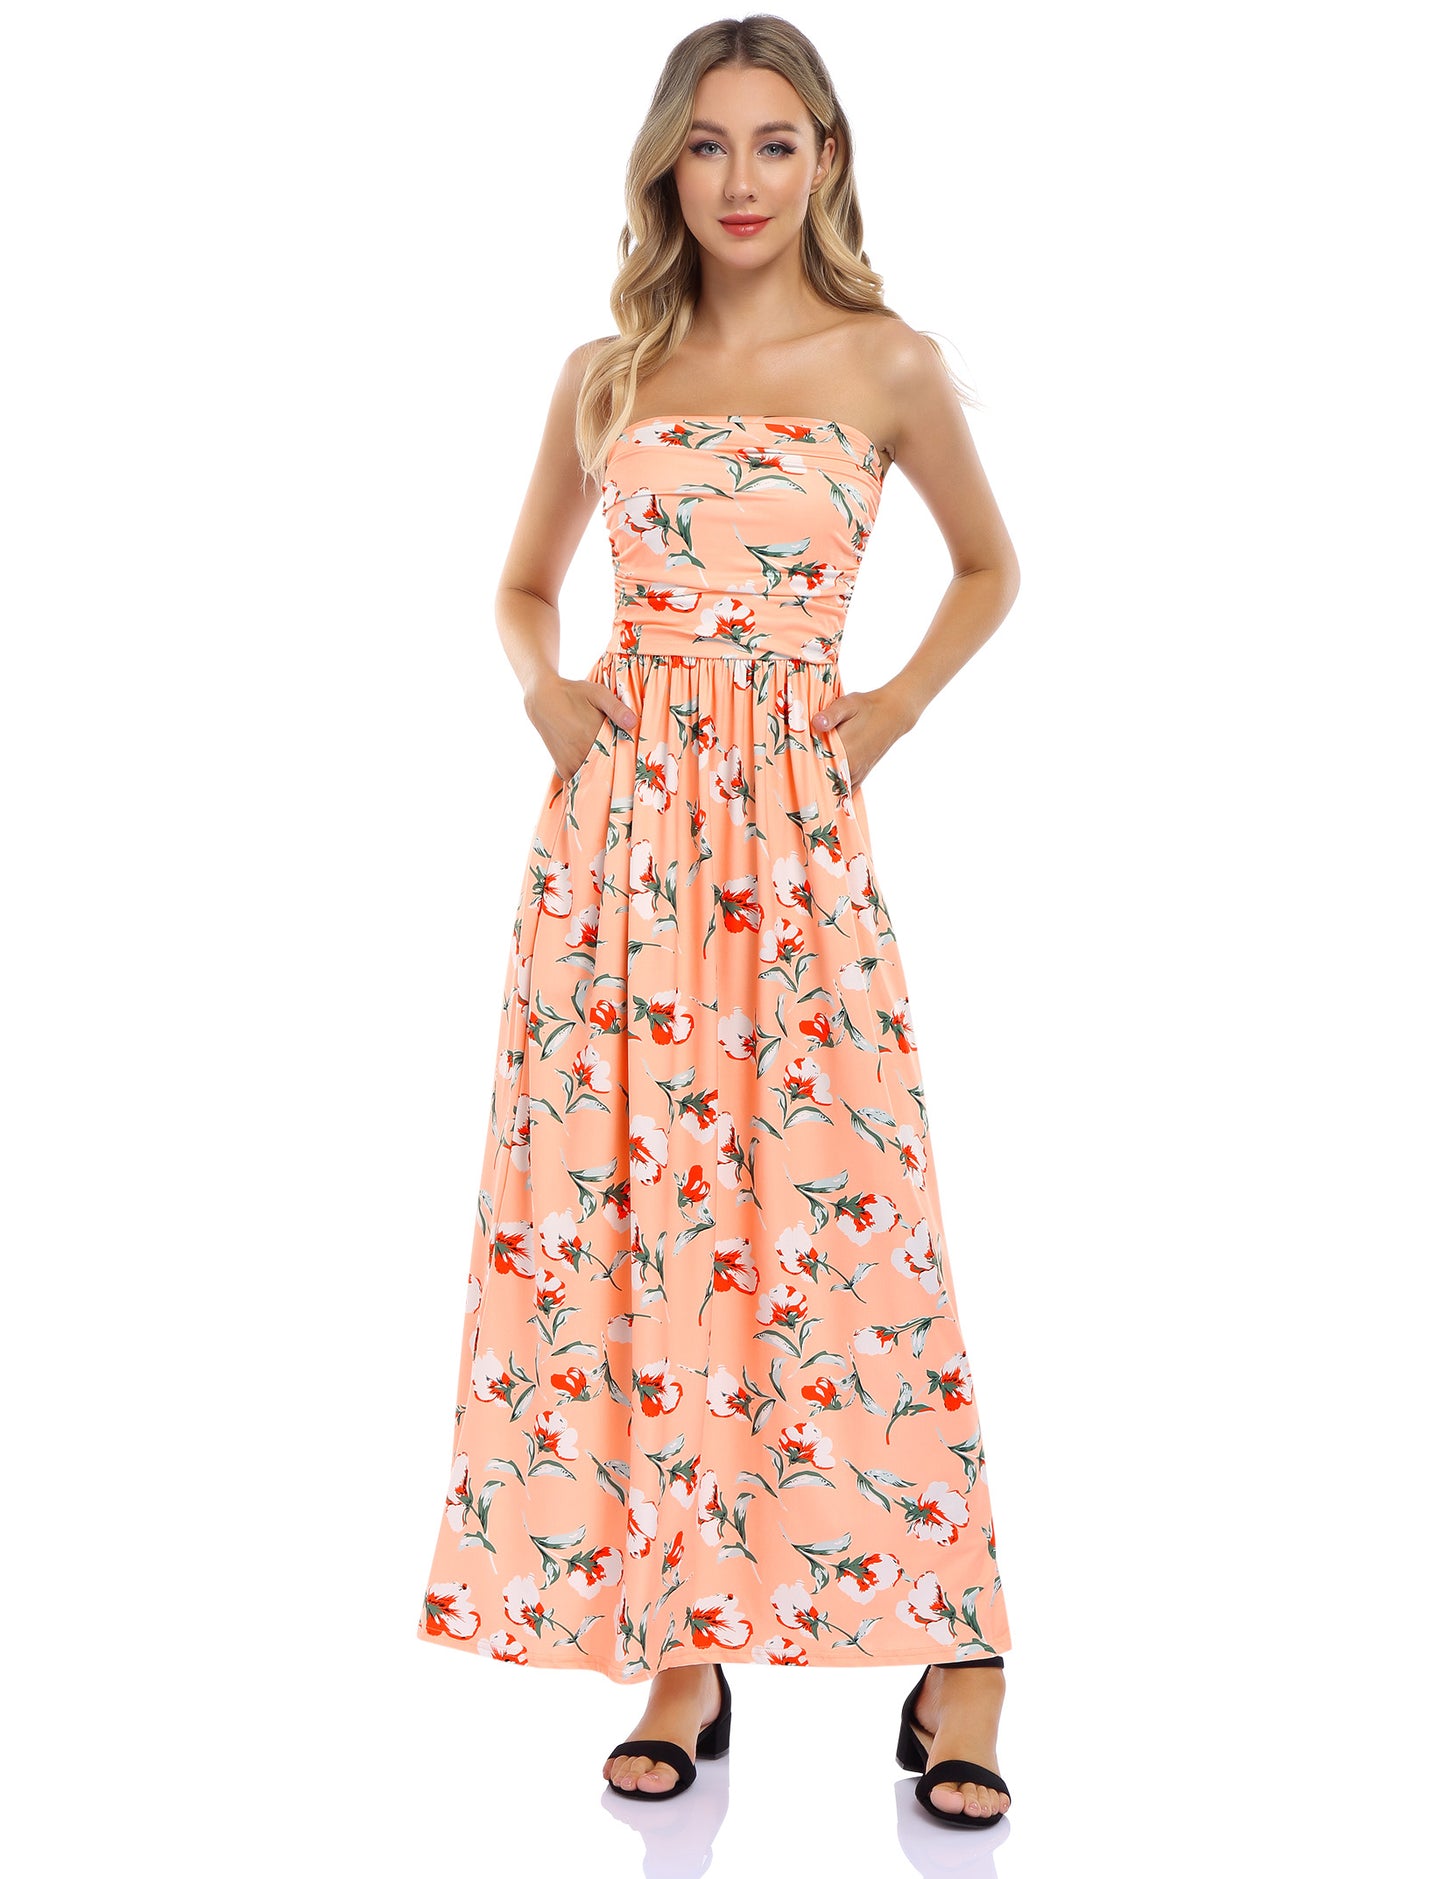 YESFASHION Women's Strapless Graceful Floral Party Maxi Long Dress